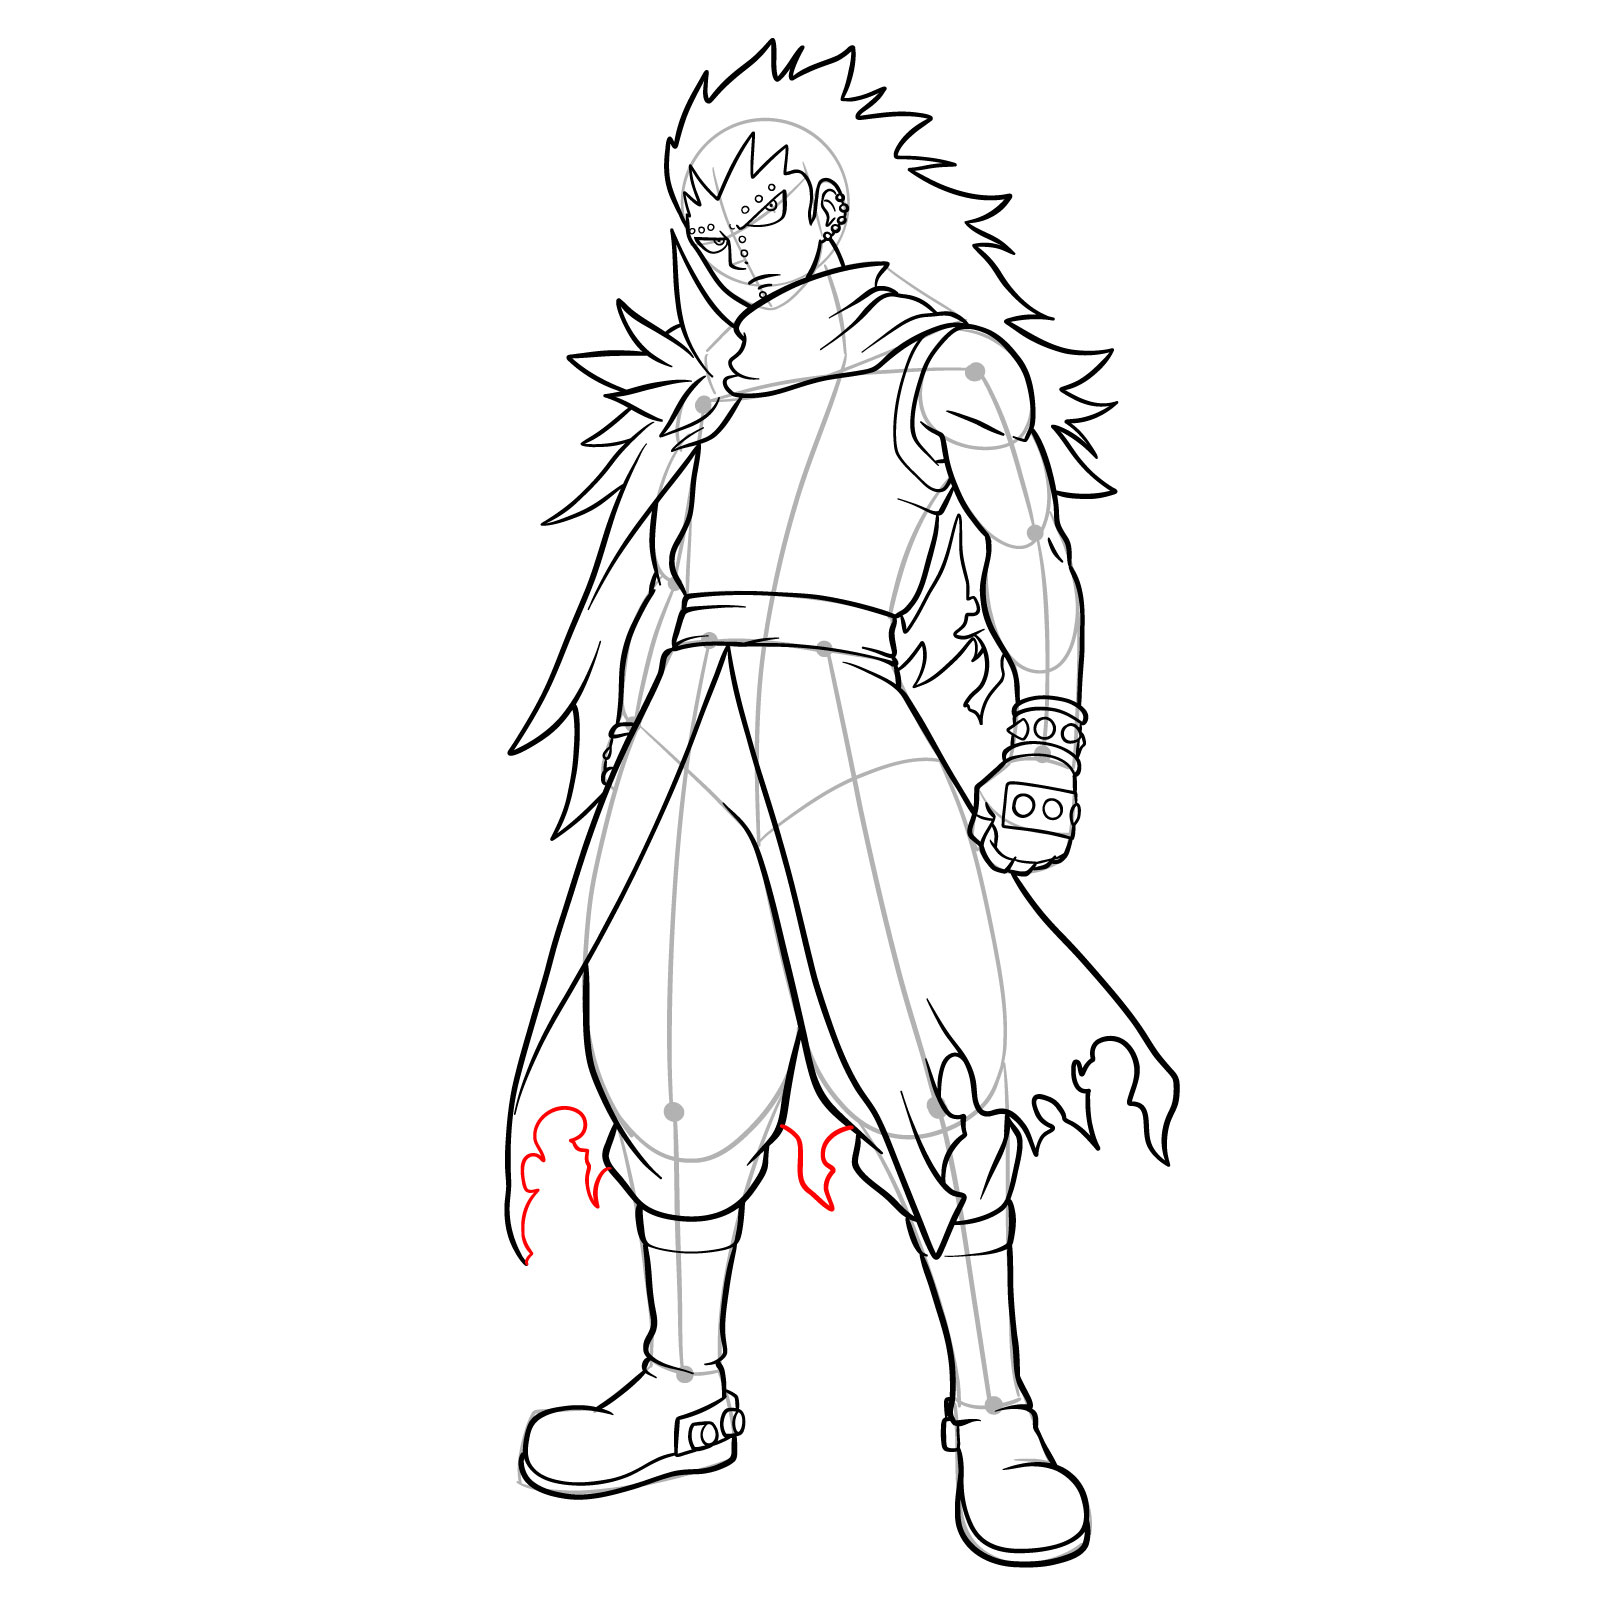 How to draw Gajeel Redfox from Fairy Tail - step 37